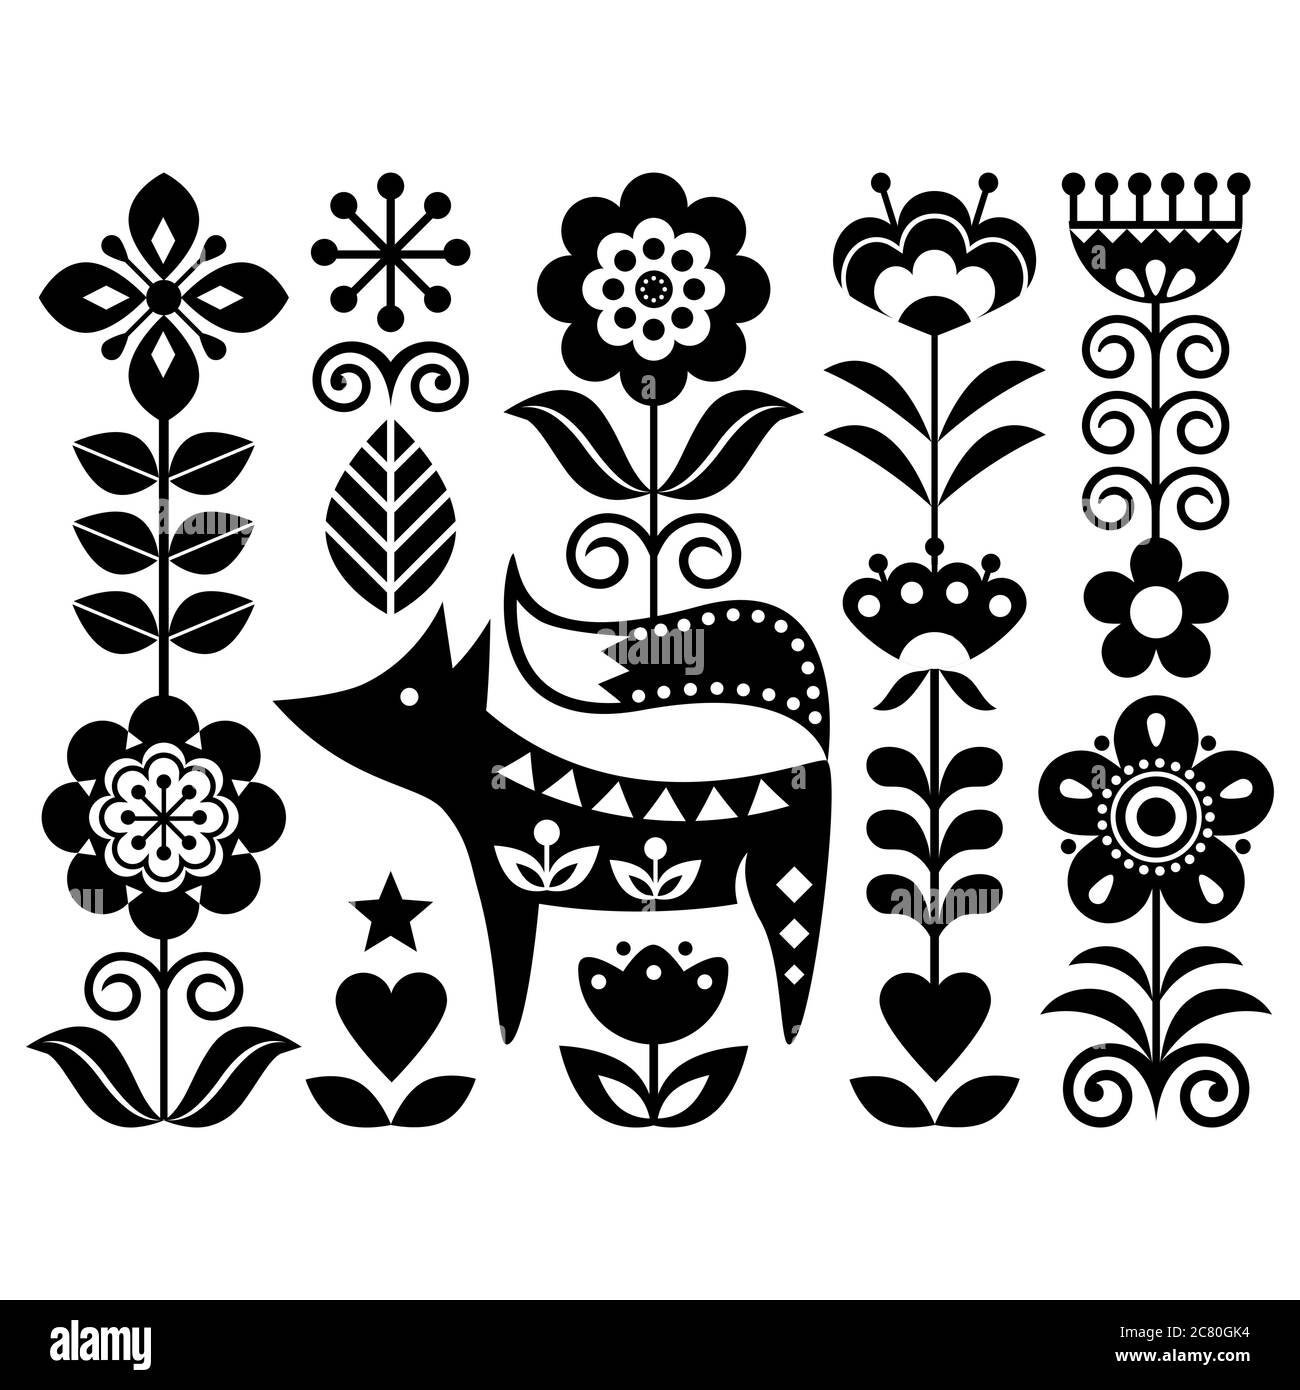 Scandinavian cute monochrome folk art vector design with flowers and fox, floral pattern perfect for greeting card or invitation inspired by tradition Stock Vector